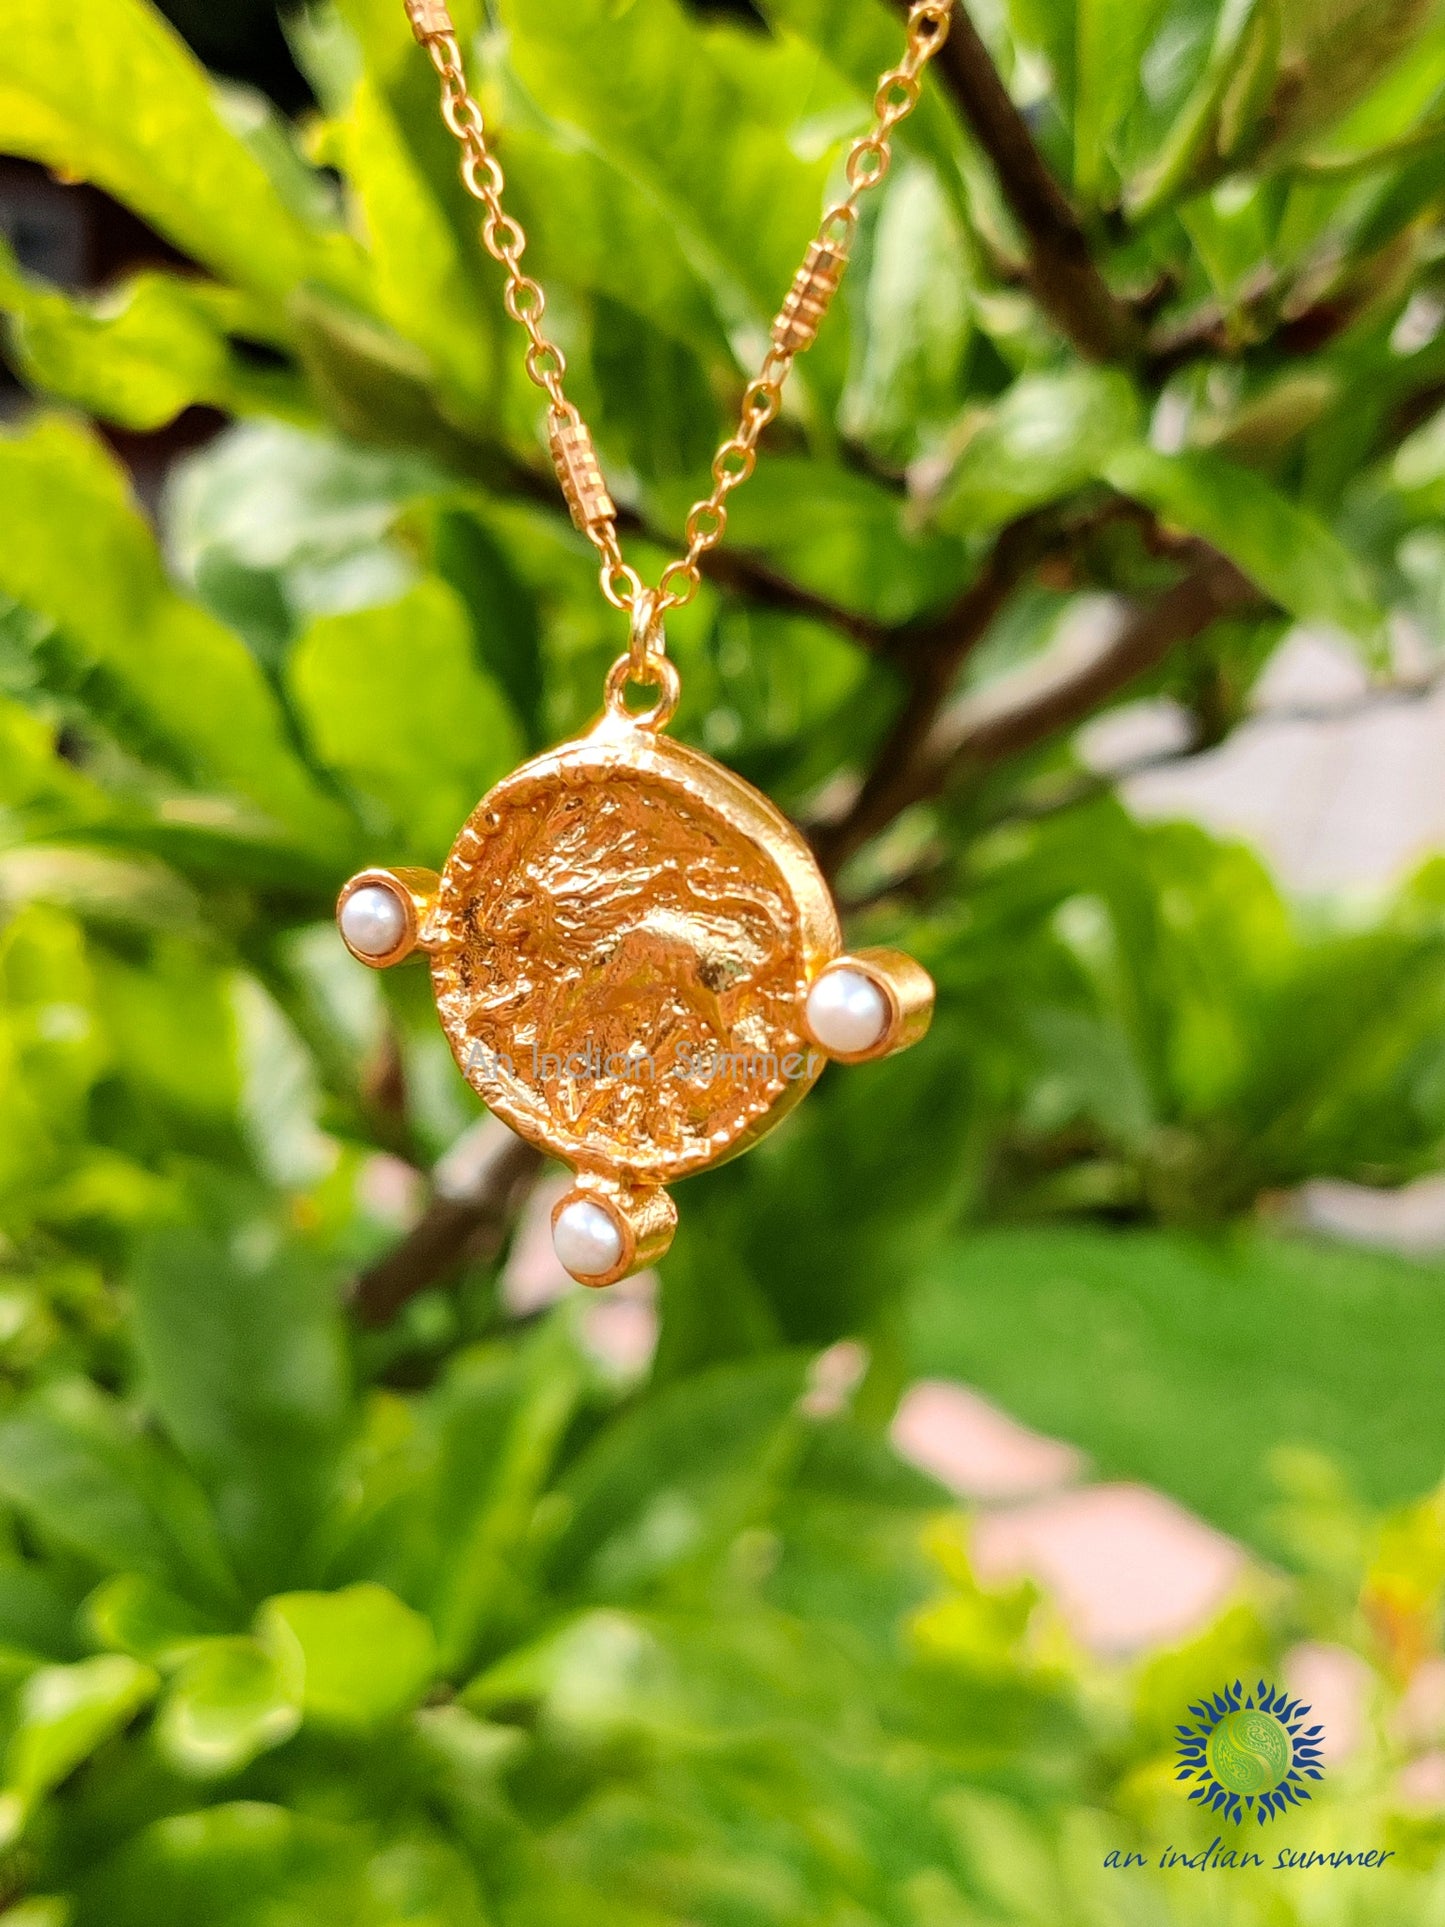 Talisman Medal Necklace - Leo | Lion Fresh Water Pearls| 22 Carat Gold Plated Semi Precious Stones | An Indian Summer | Seasonless Timeless Sustainable Ethical Authentic Artisan Conscious Clothing Lifestyle Brand